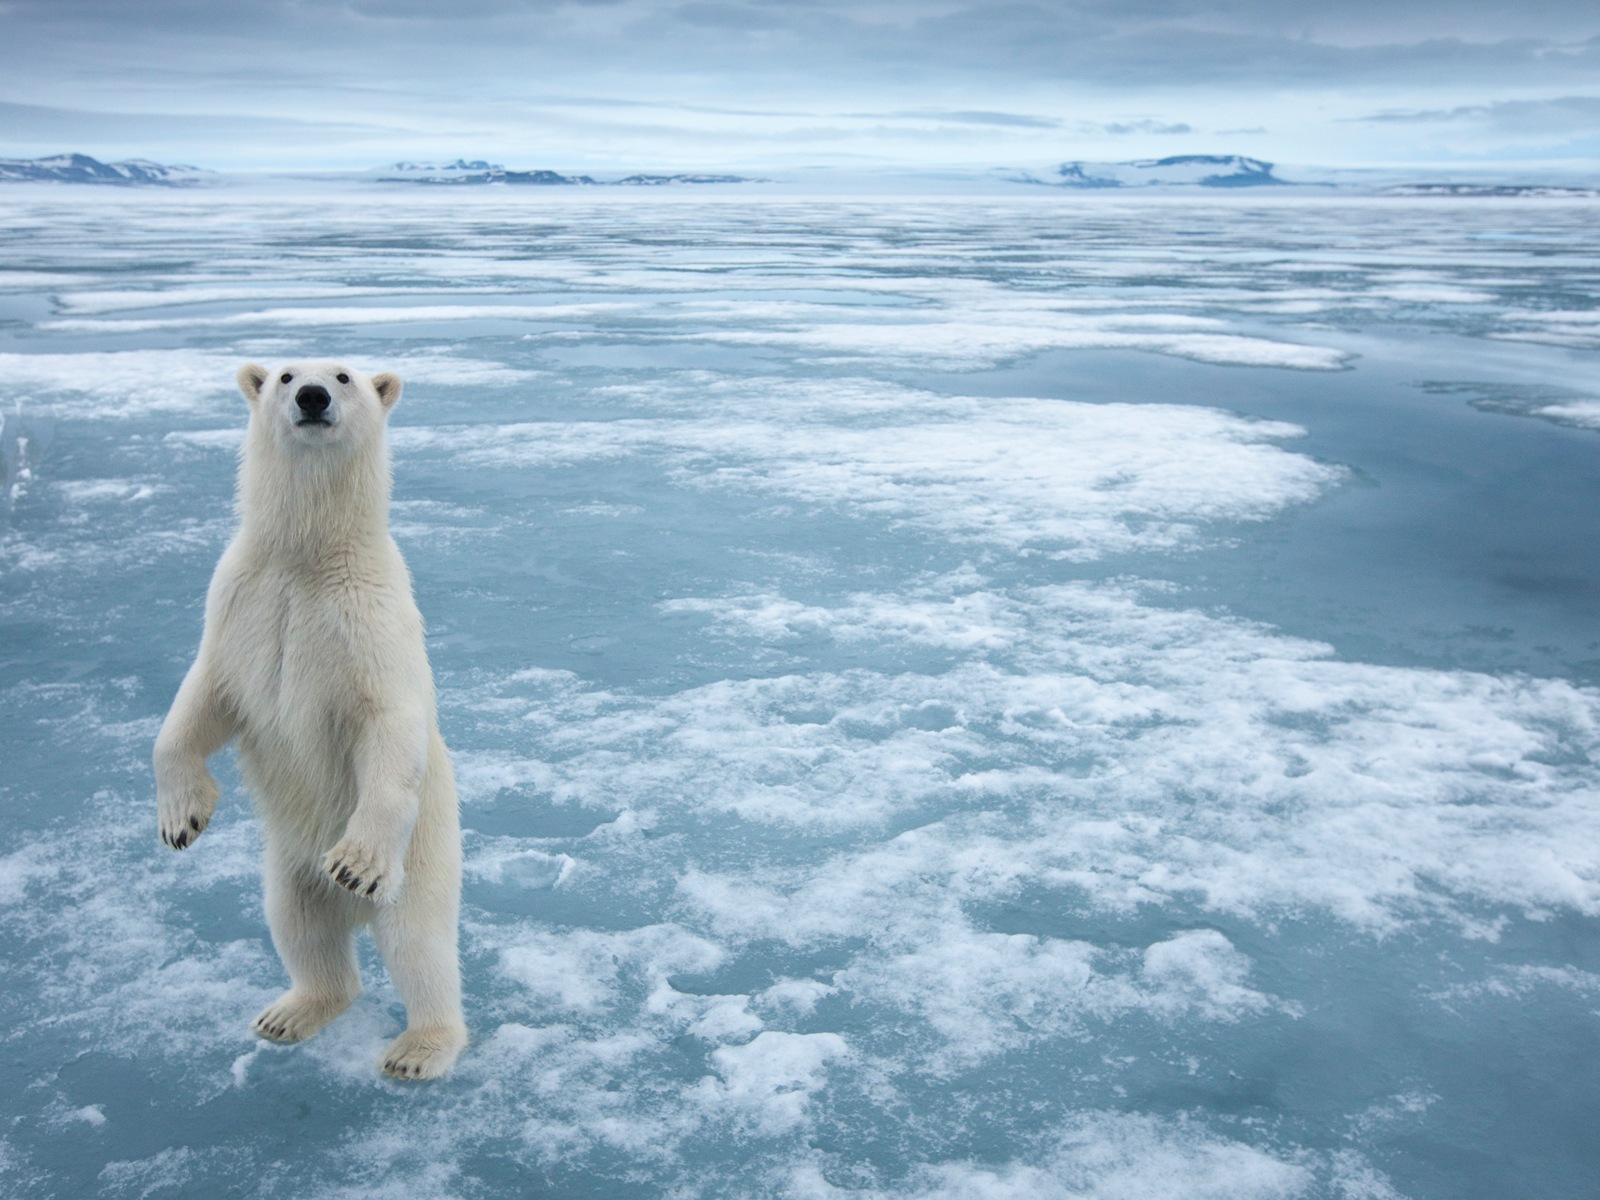 Windows 8 Wallpapers: Arctic, the nature ecological landscape, arctic animals #6 - 1600x1200